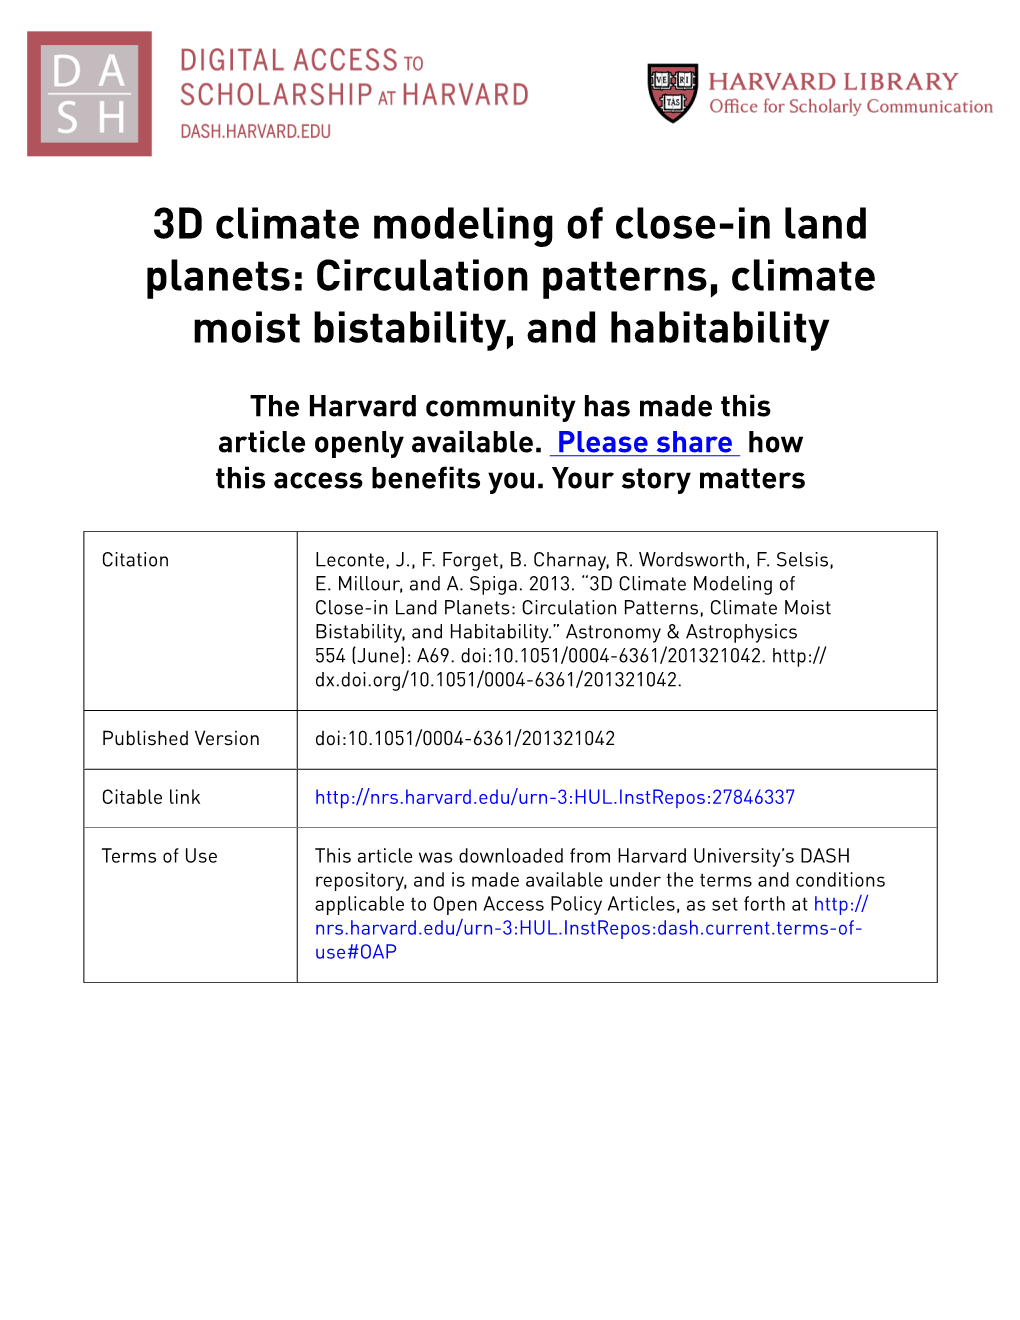 Circulation Patterns, Climate Moist Bistability, and Habitability